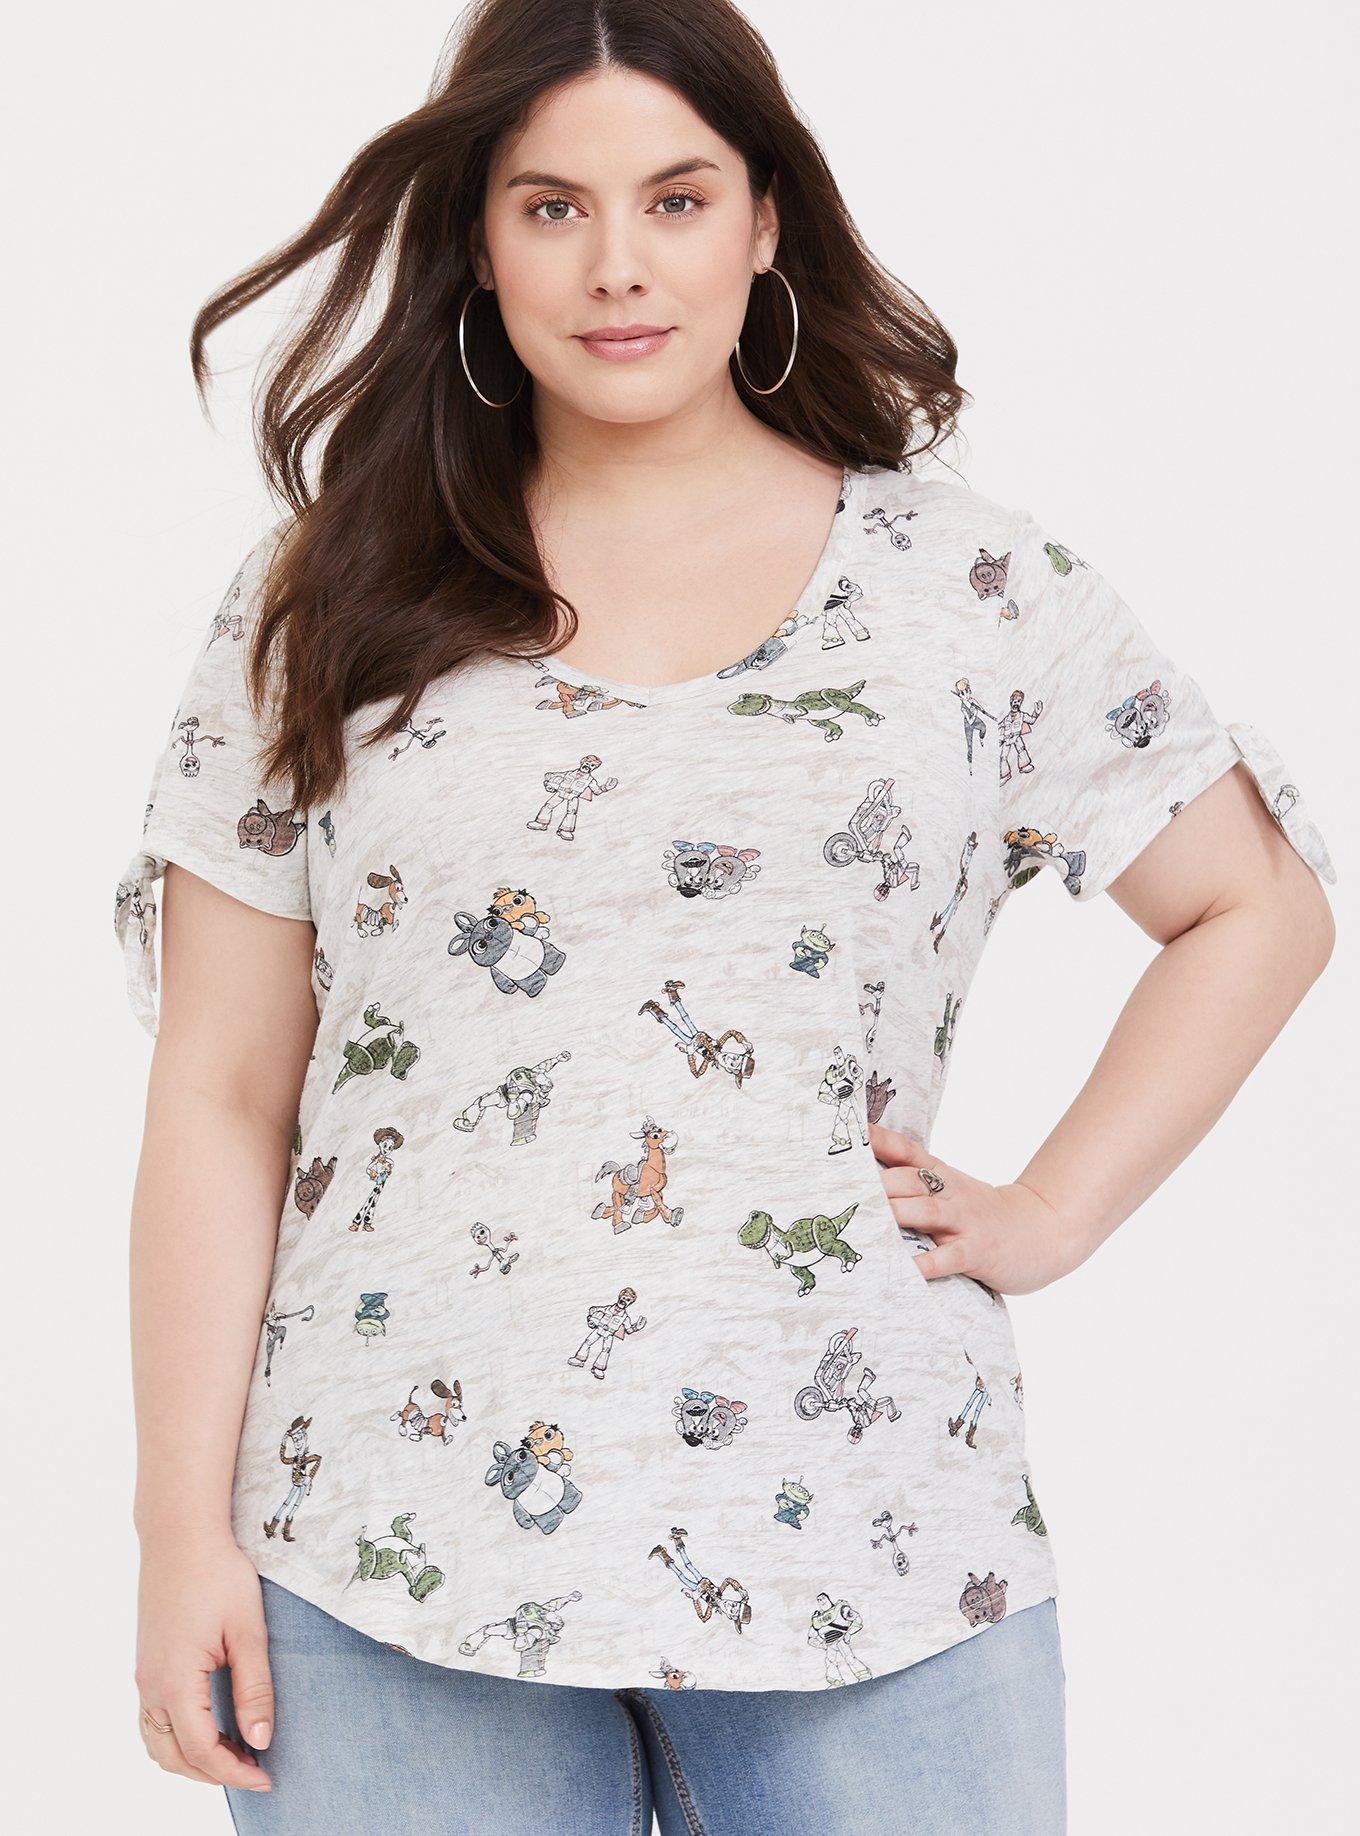 Plus Size - Her Universe Toy Story Character Taupe Slub Top - Torrid